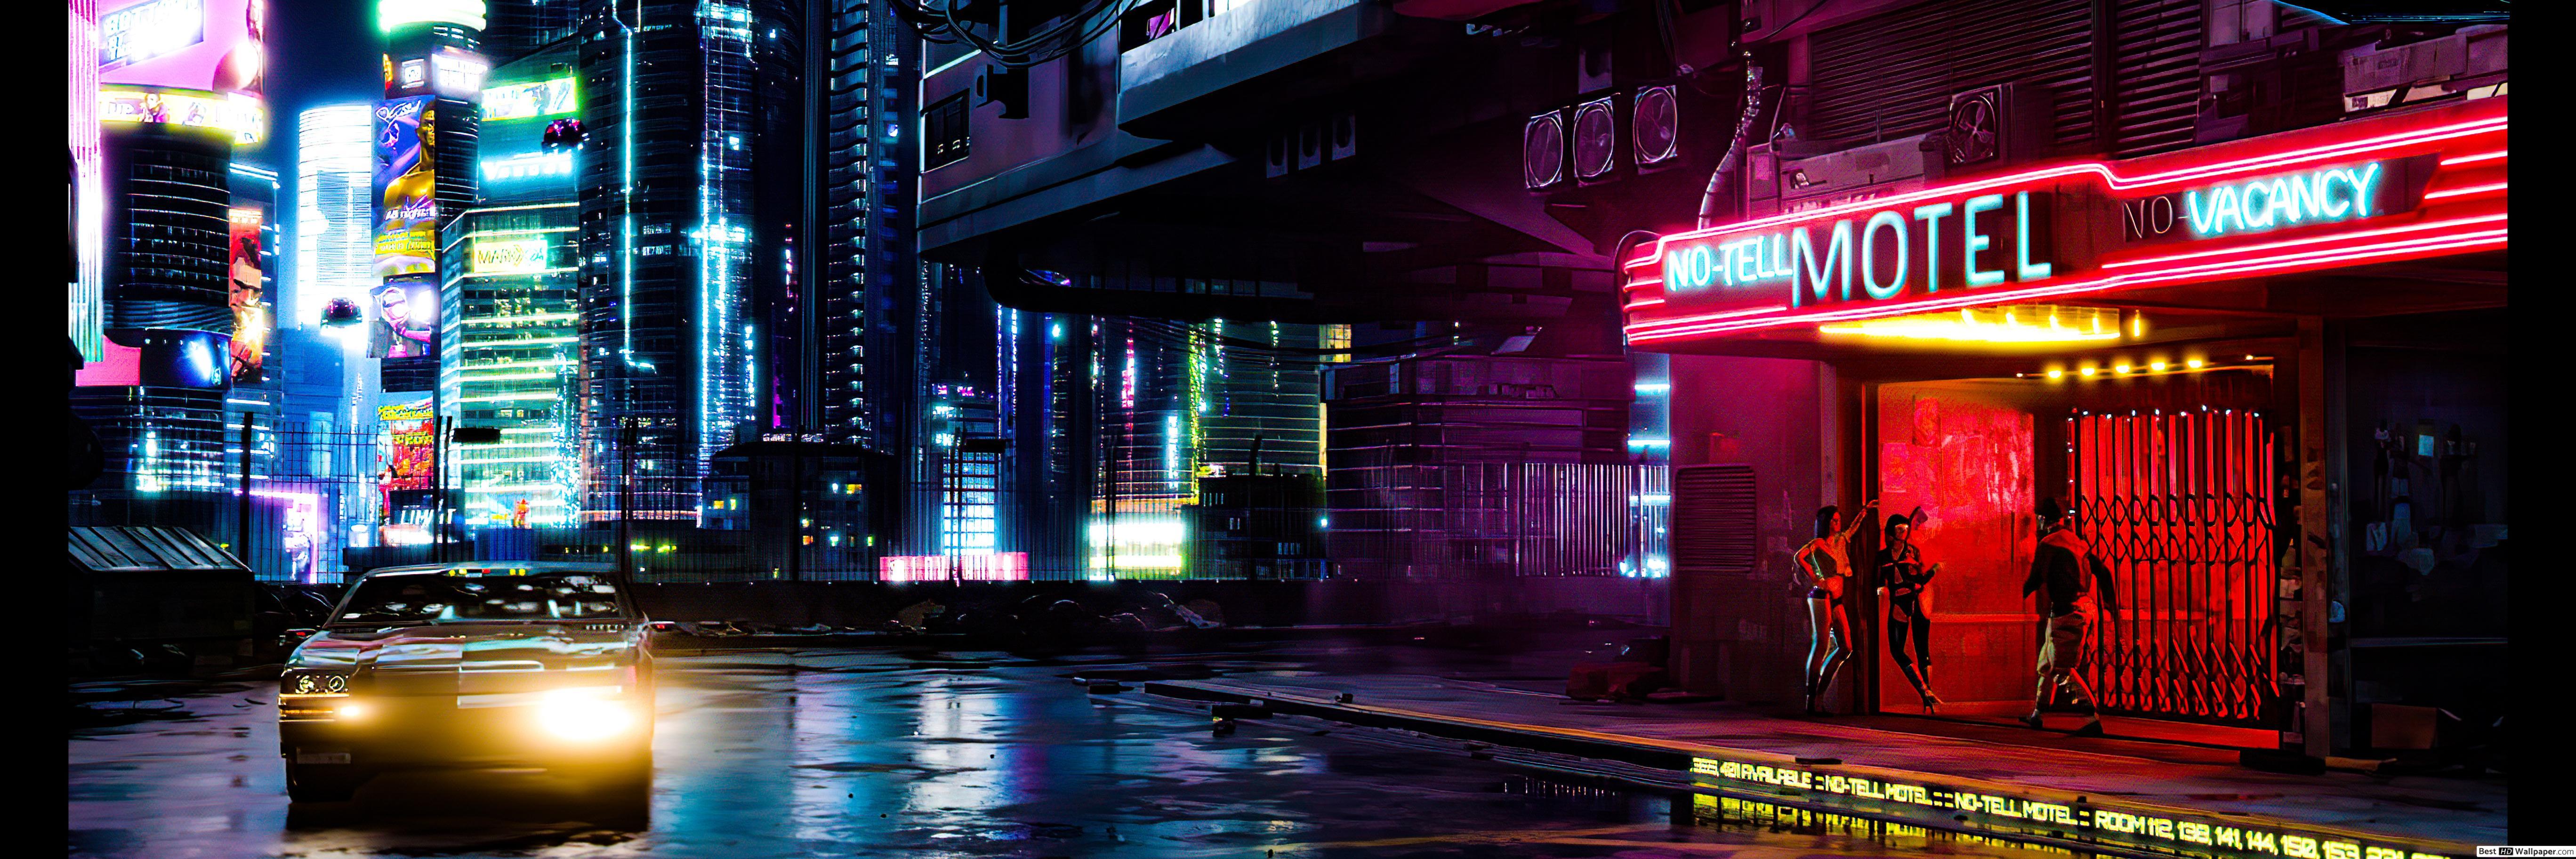 Featured image of post Cyberpunk 2077 Dual Monitor Wallpaper 3840X1080 Download cyberpunk 2077 car 4k hd wallpaper from the above hd widescreen 4k 5k 8k ultra hd resolutions for desktops laptops notebook apple iphone ipad android mobiles tablets